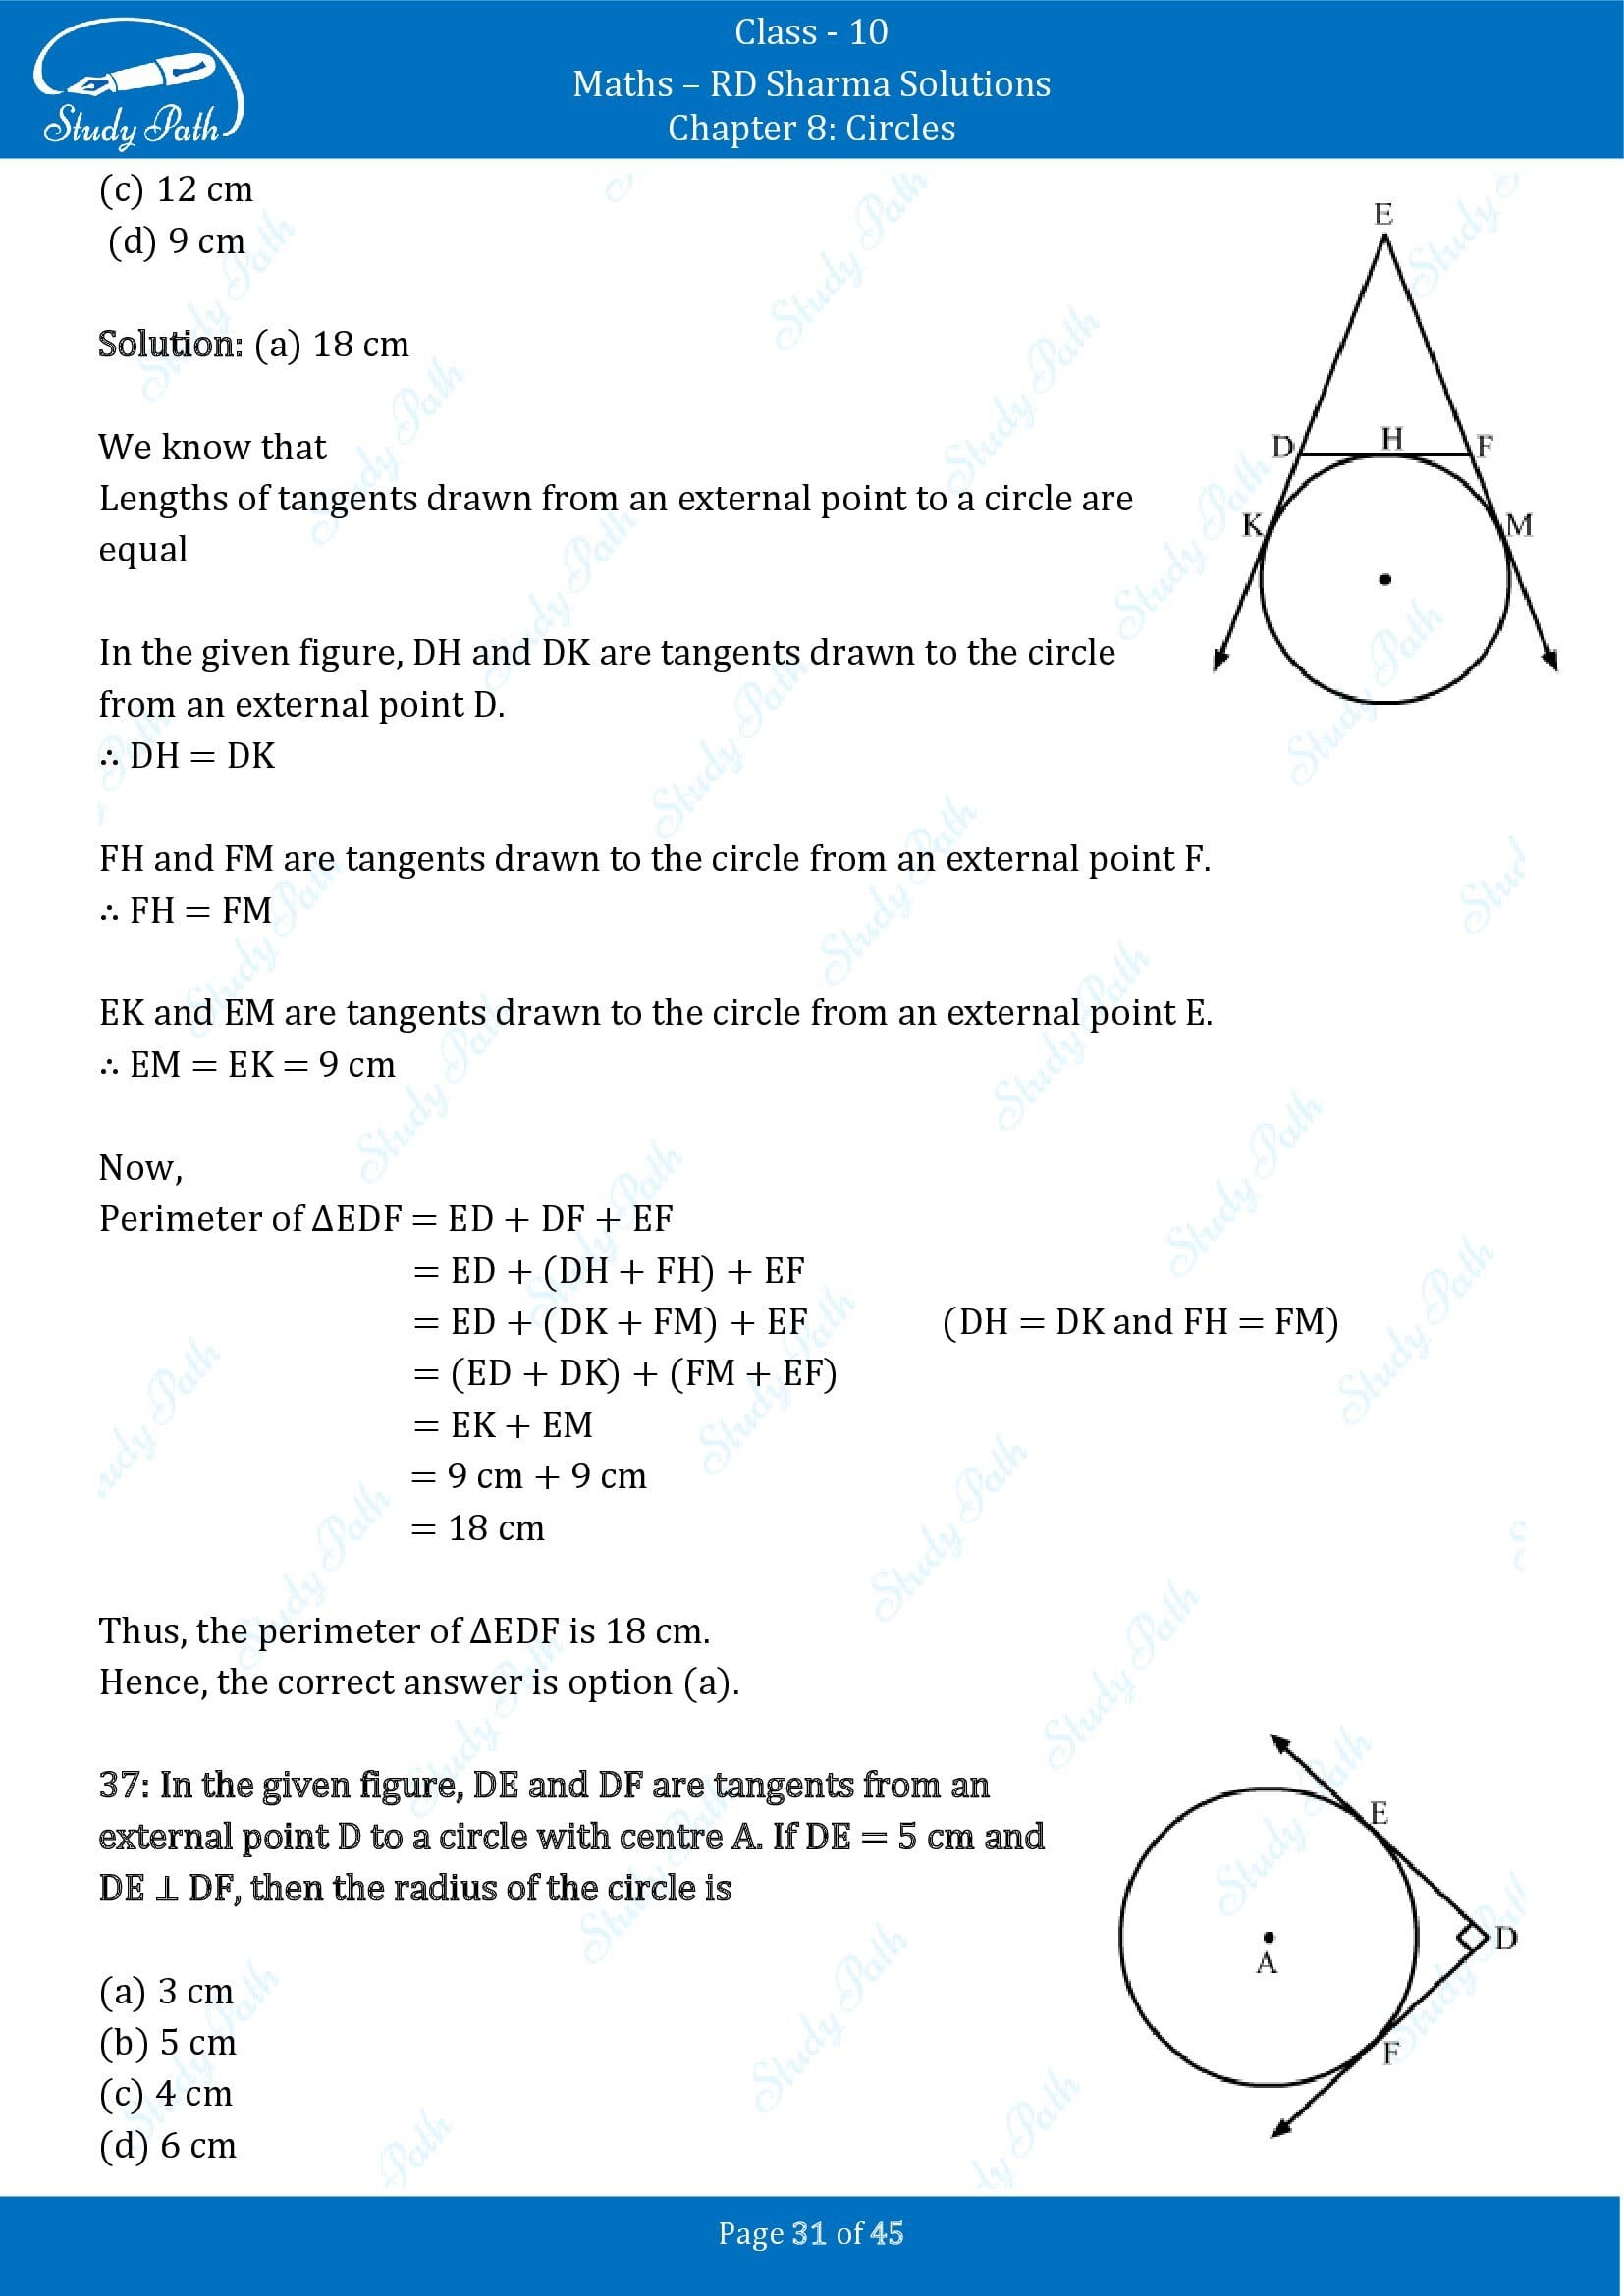 RD Sharma Solutions Class 10 Chapter 8 Circles Multiple Choice Questions MCQs 00031